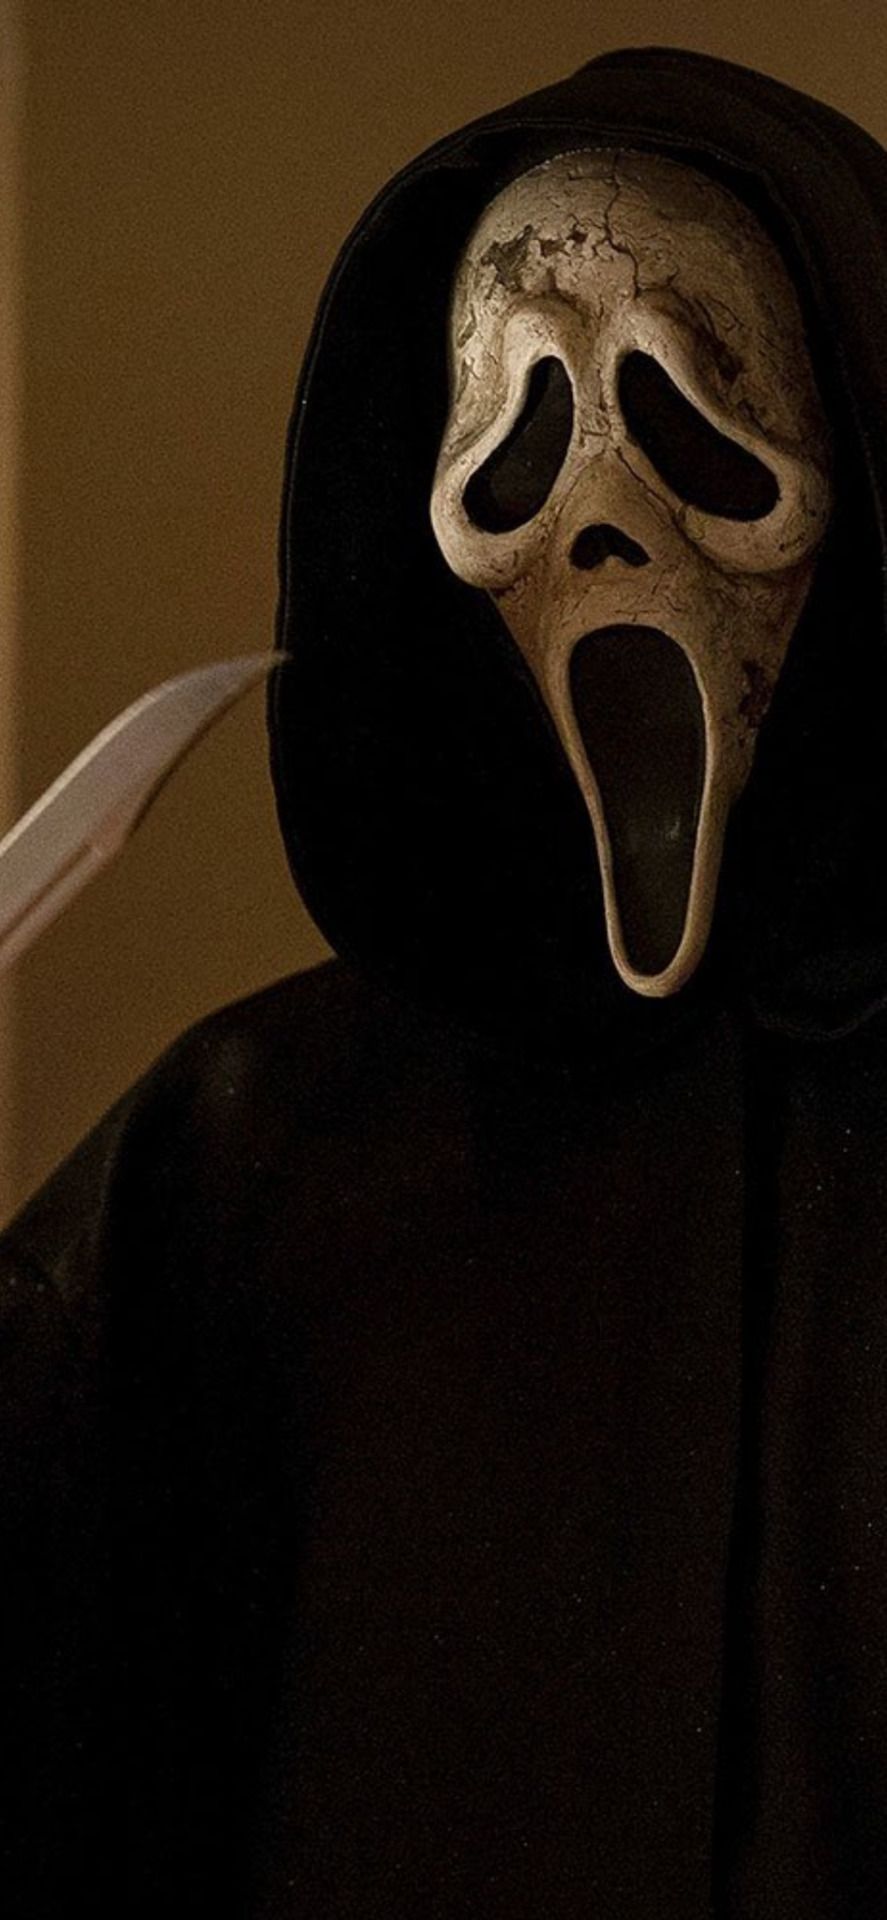 The scream mask from the horror movie franchise - Ghostface